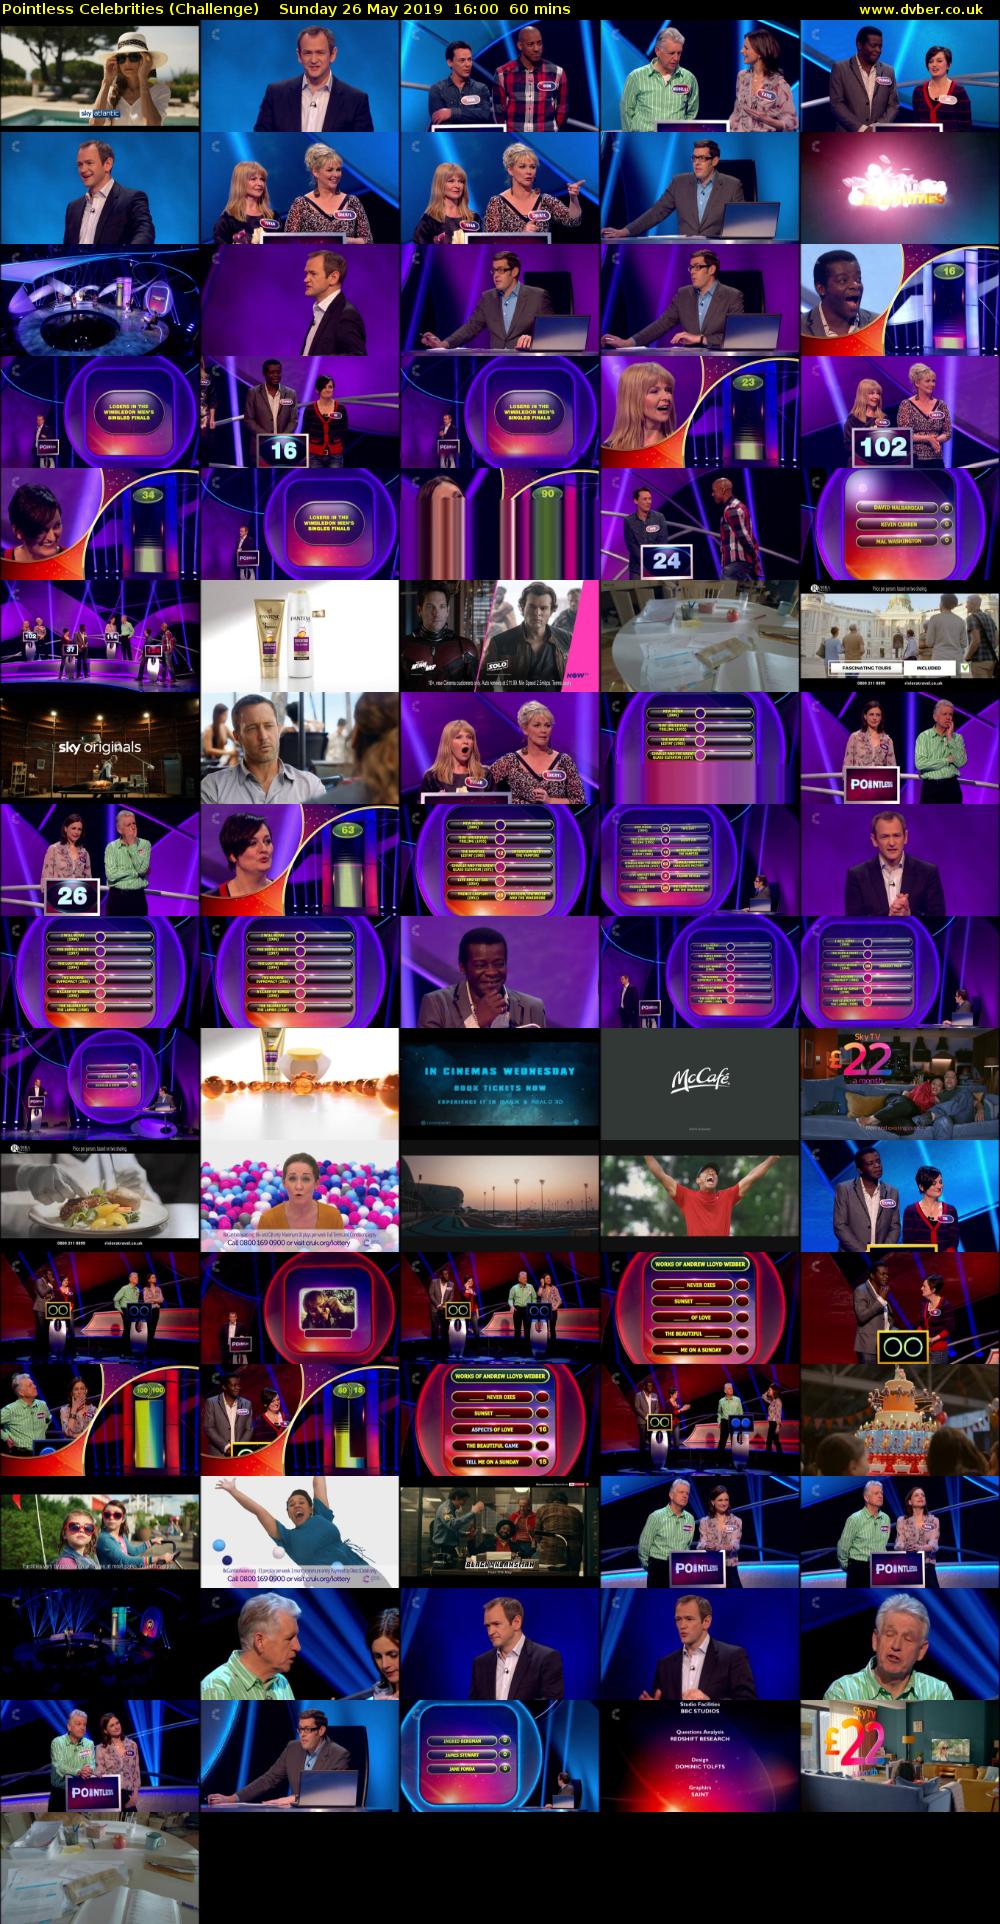 Pointless Celebrities (Challenge) Sunday 26 May 2019 16:00 - 17:00